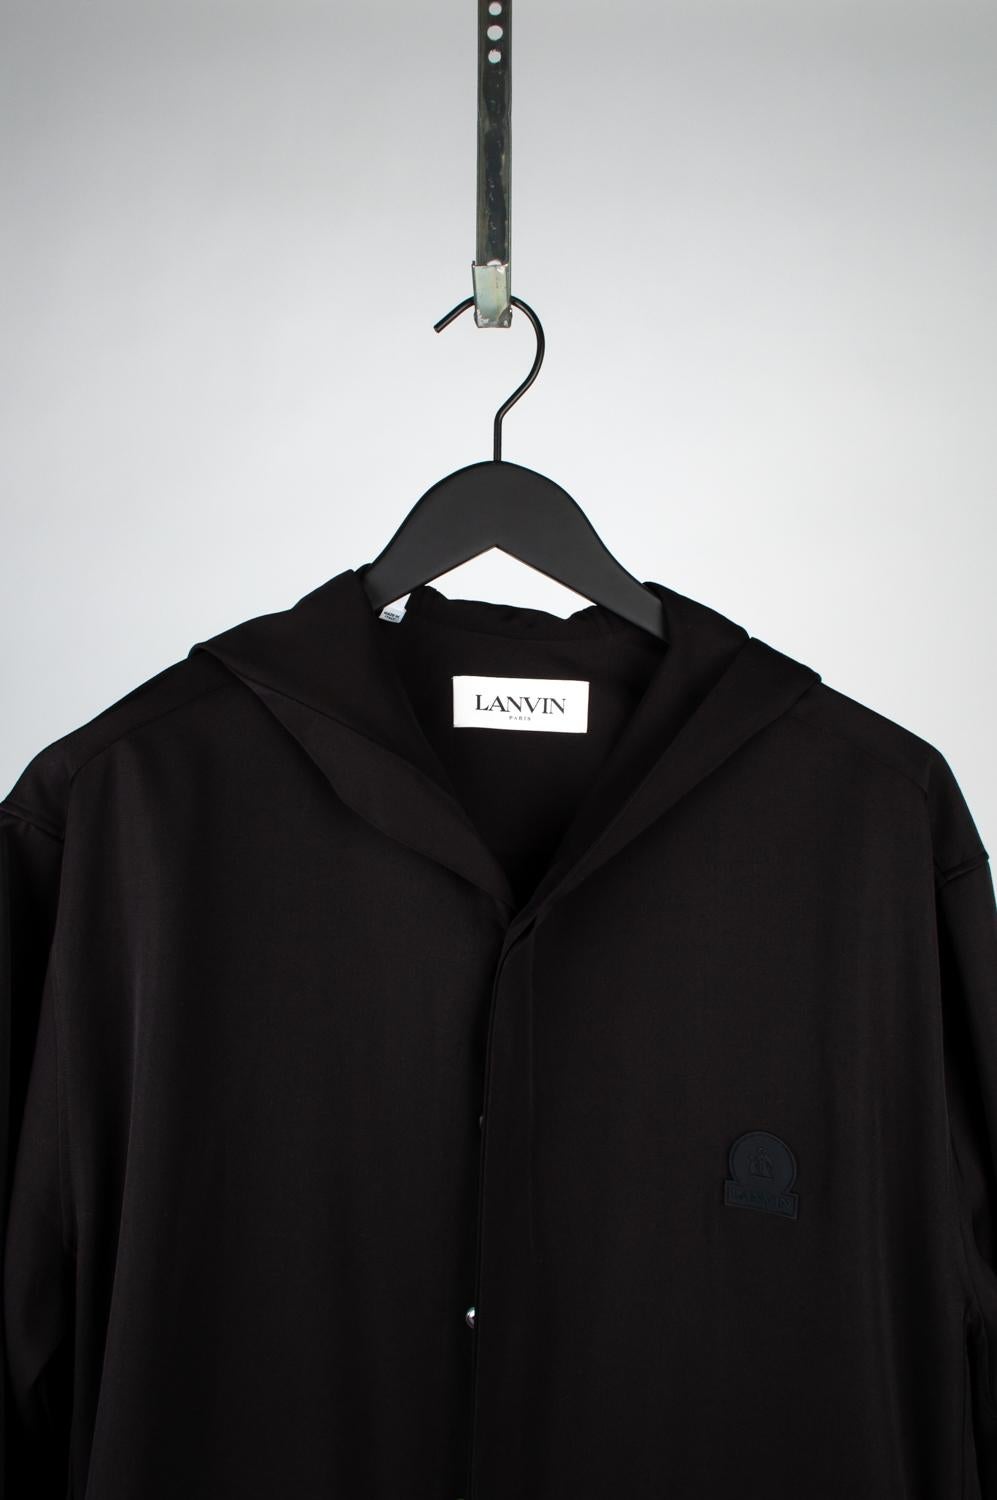 100% genuine Lanvin Hooded Light Jacket, S551-1
Color: Black
(An actual color may a bit vary due to individual computer screen interpretation)
Material: 100% wool
Tag size: 41/16 runs Large
This jacket is great quality item. Rate 9 of 10, excellent